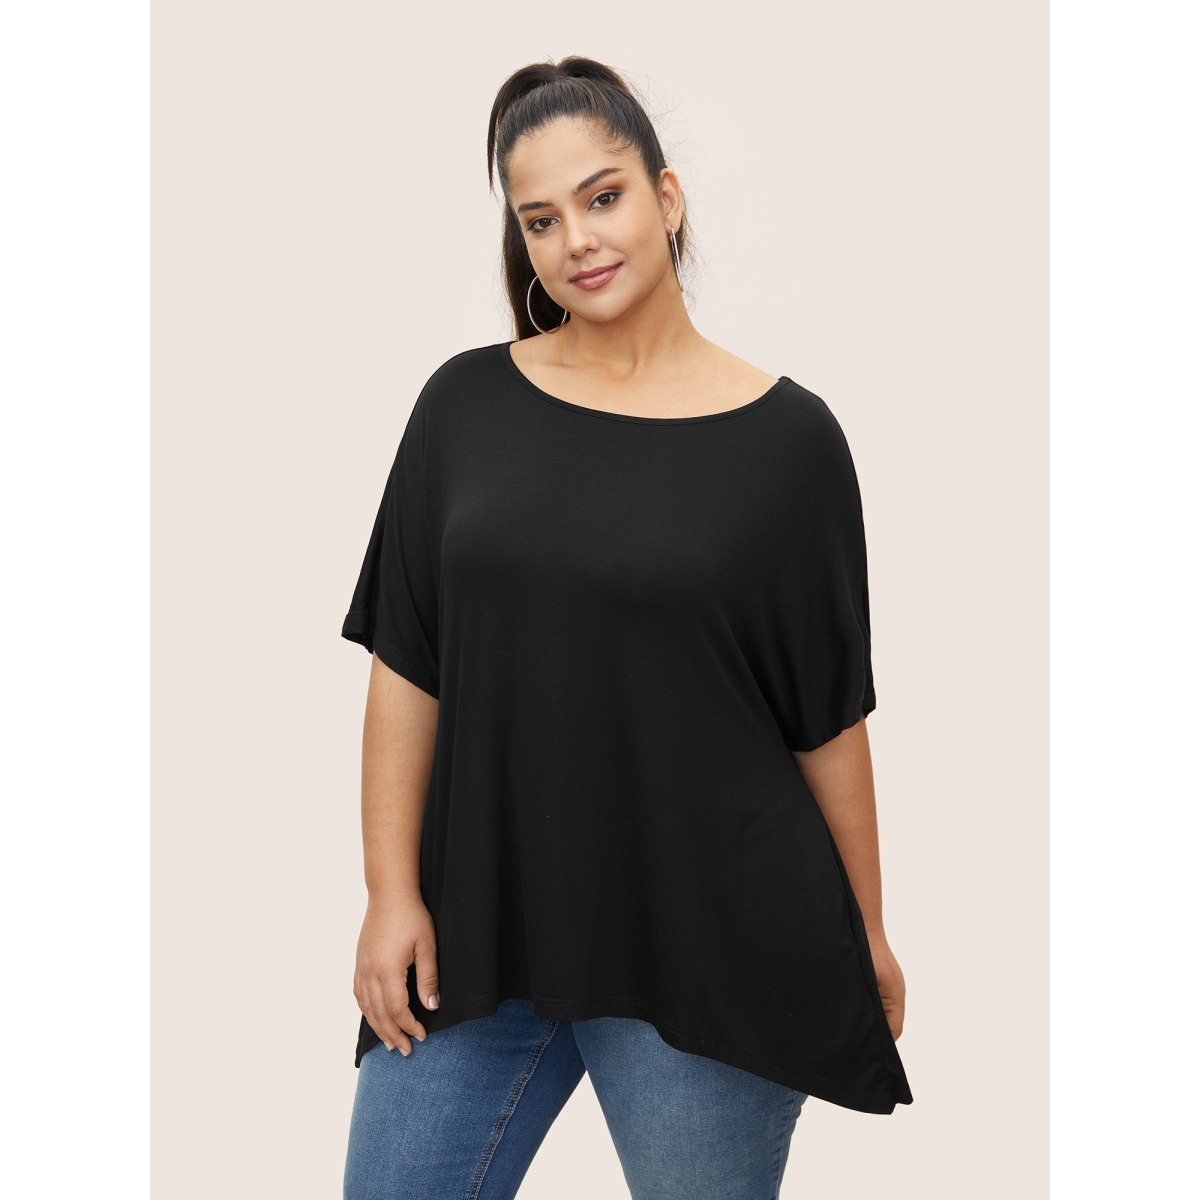 

Plus Size Solid Boat Neck Batwing Sleeve T-shirt Black Women Casual Boat Neck Everyday T-shirts BloomChic